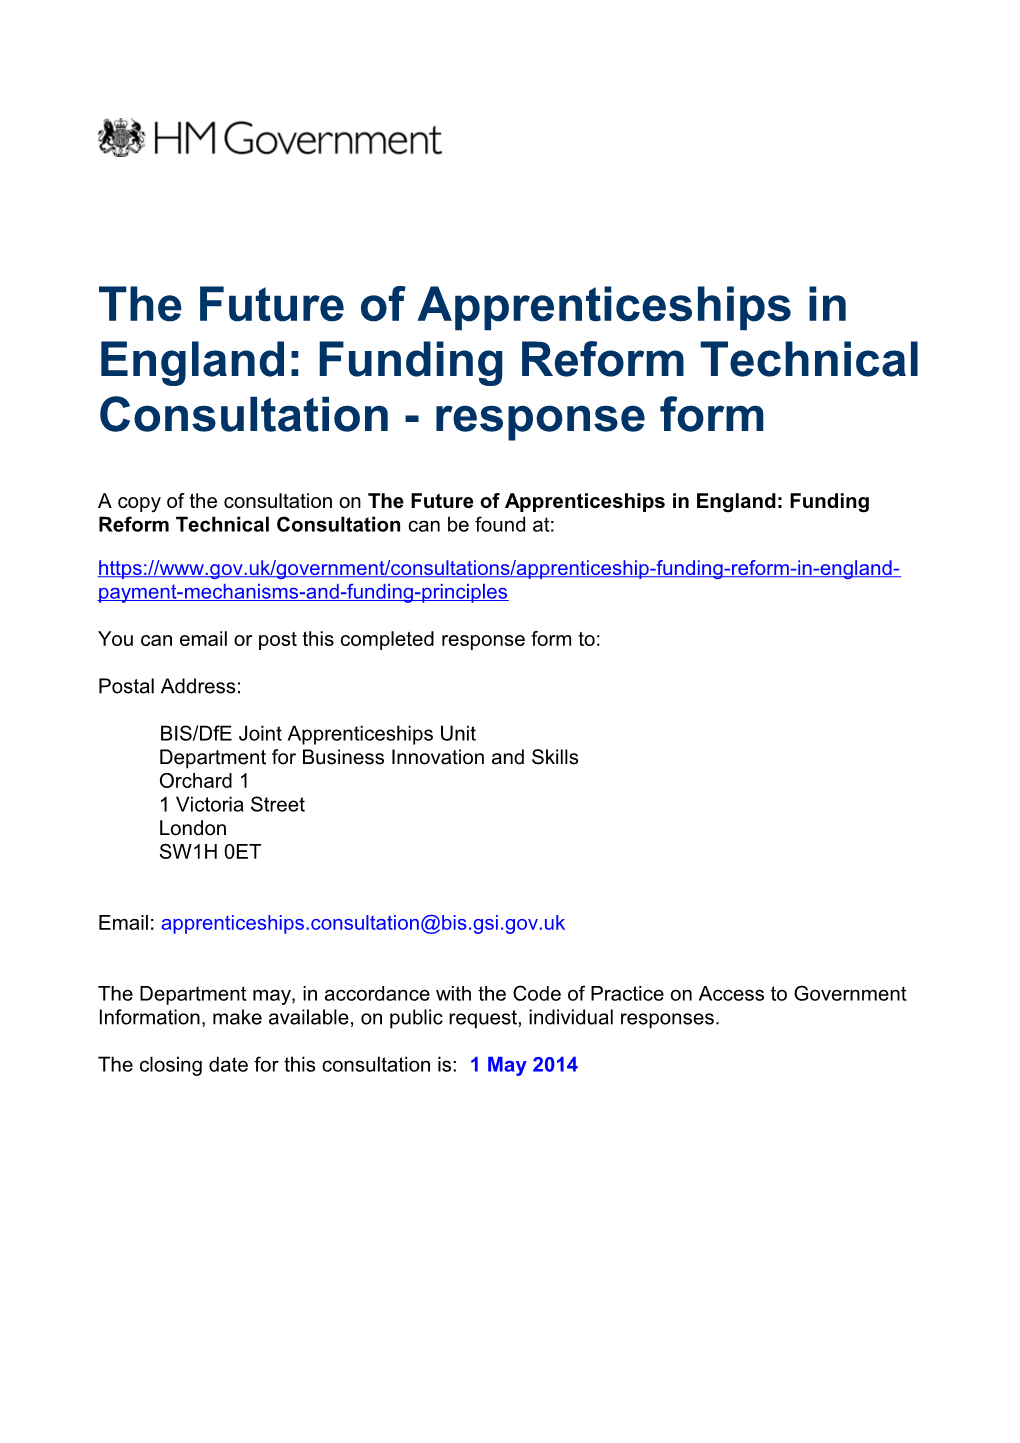 The Future of Apprenticeships in England: Funding Reform Technical Consultation - Response Form